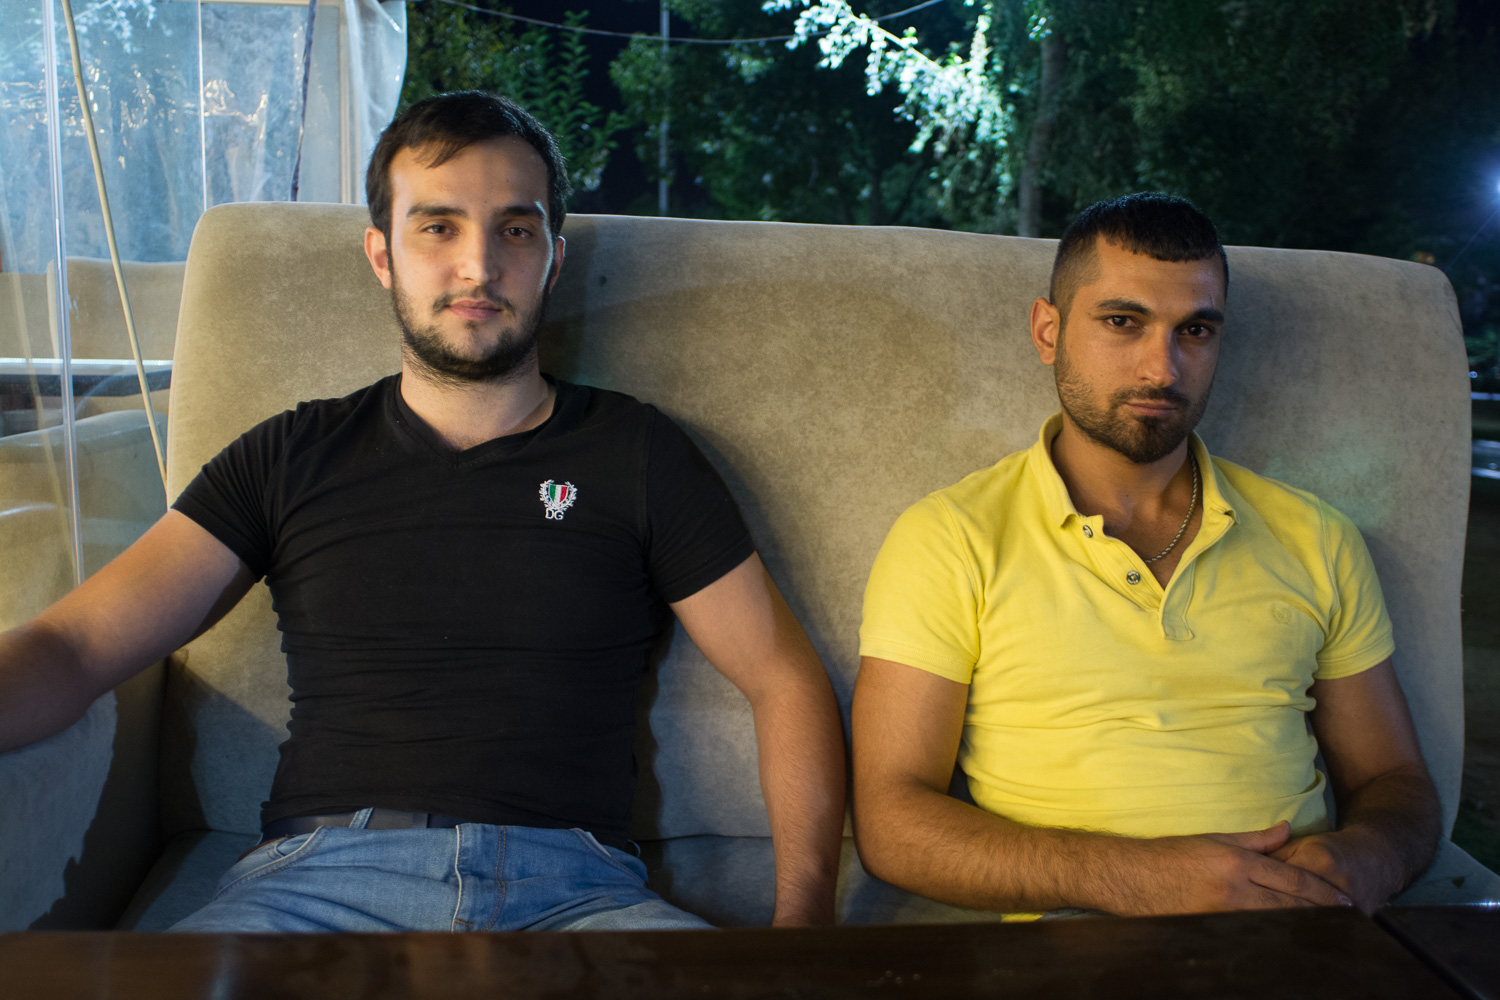 After a long shift in the factory, a Turkish and a Kurdish worker shares info on working conditions.